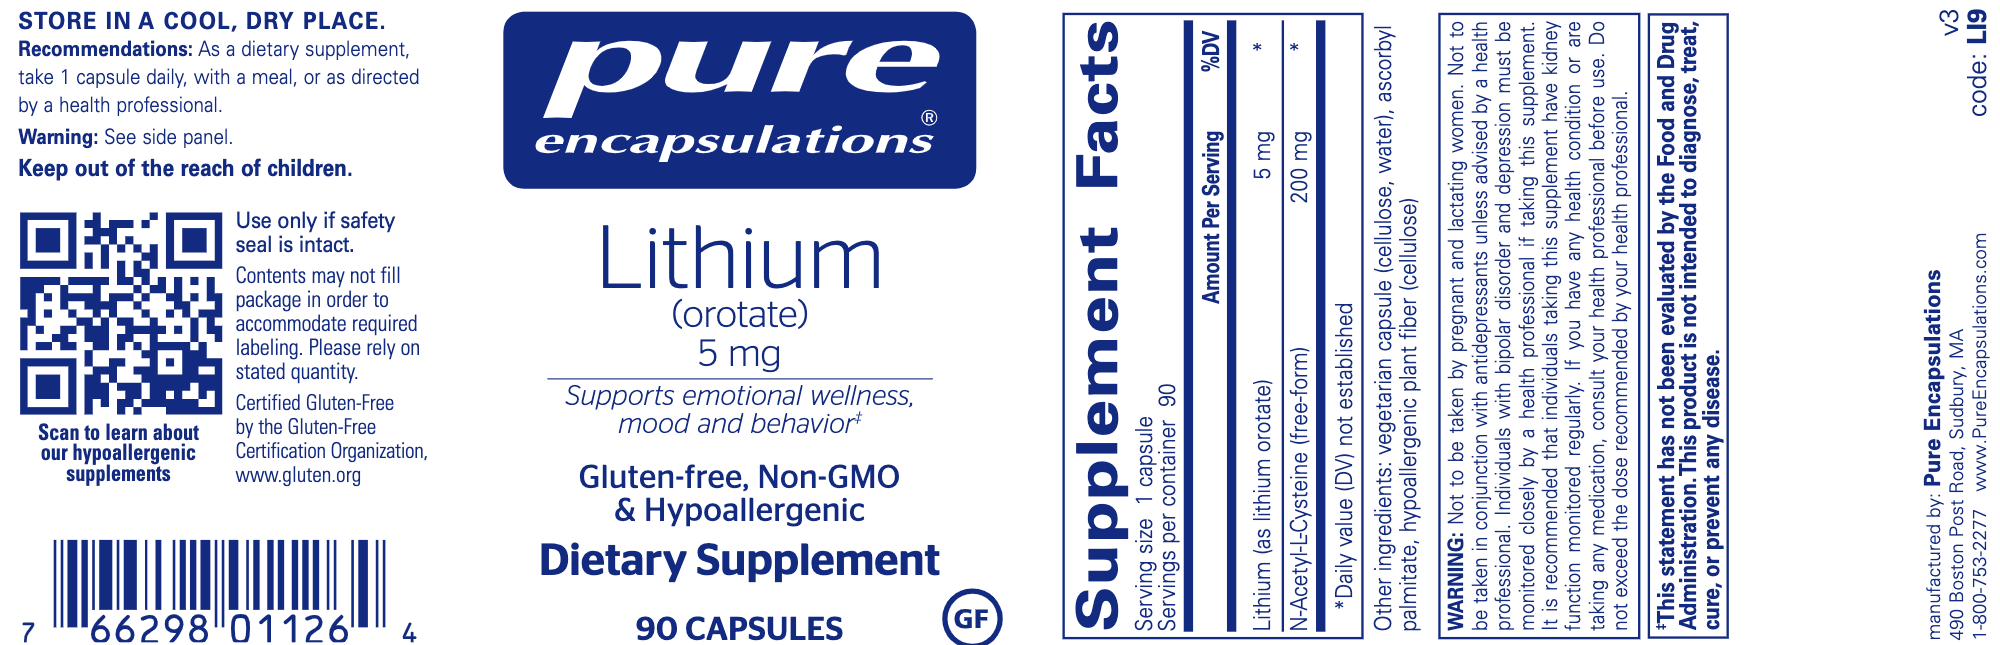 Lithium (orotate) (5 mg)-Vitamins & Supplements-Pure Encapsulations-180 Capsules-Pine Street Clinic